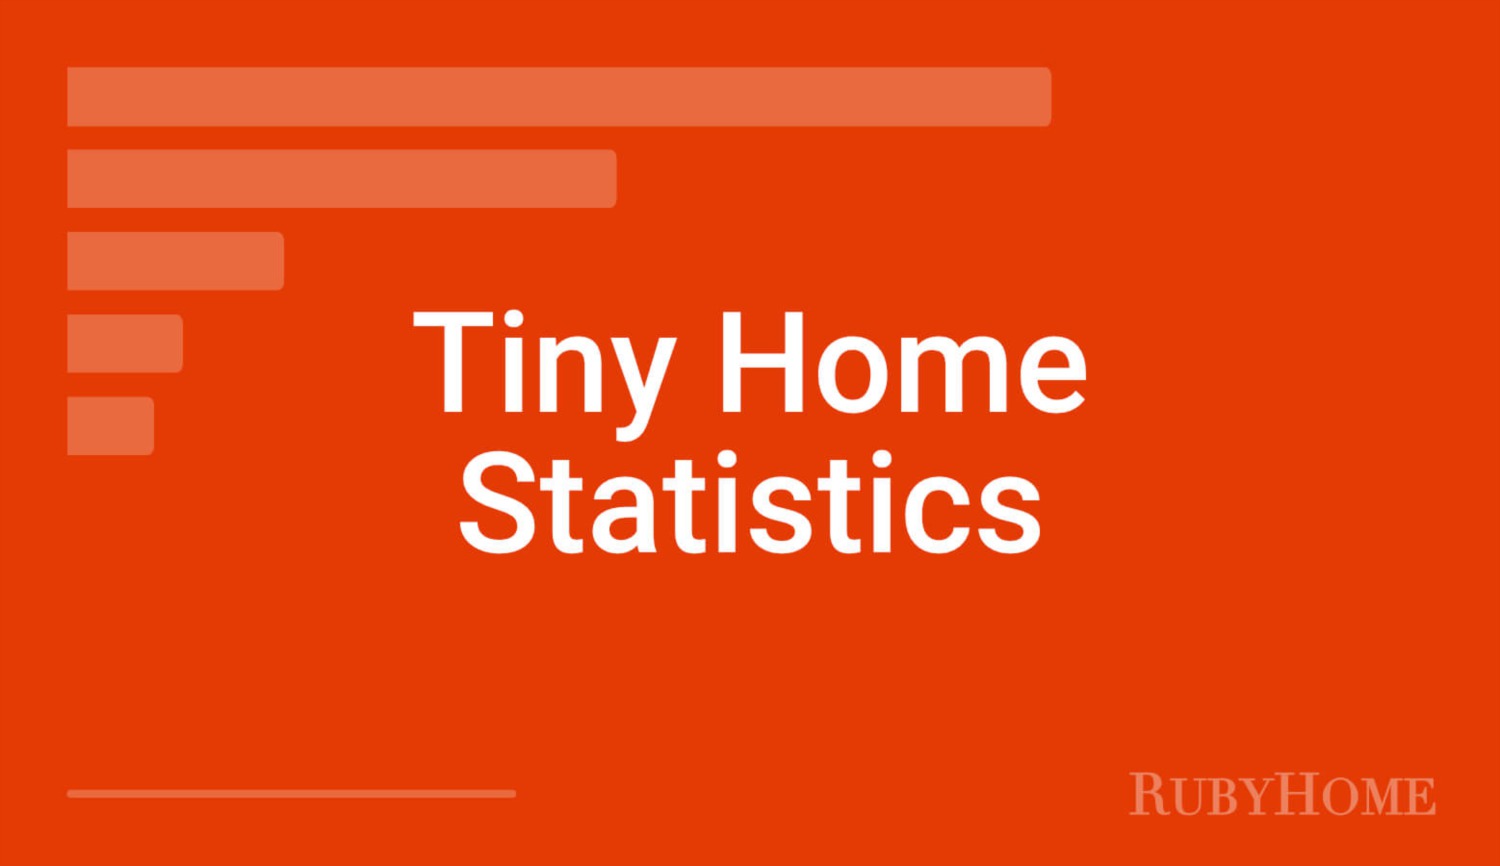 56% of Americans Say They Would Live in a Tiny Home